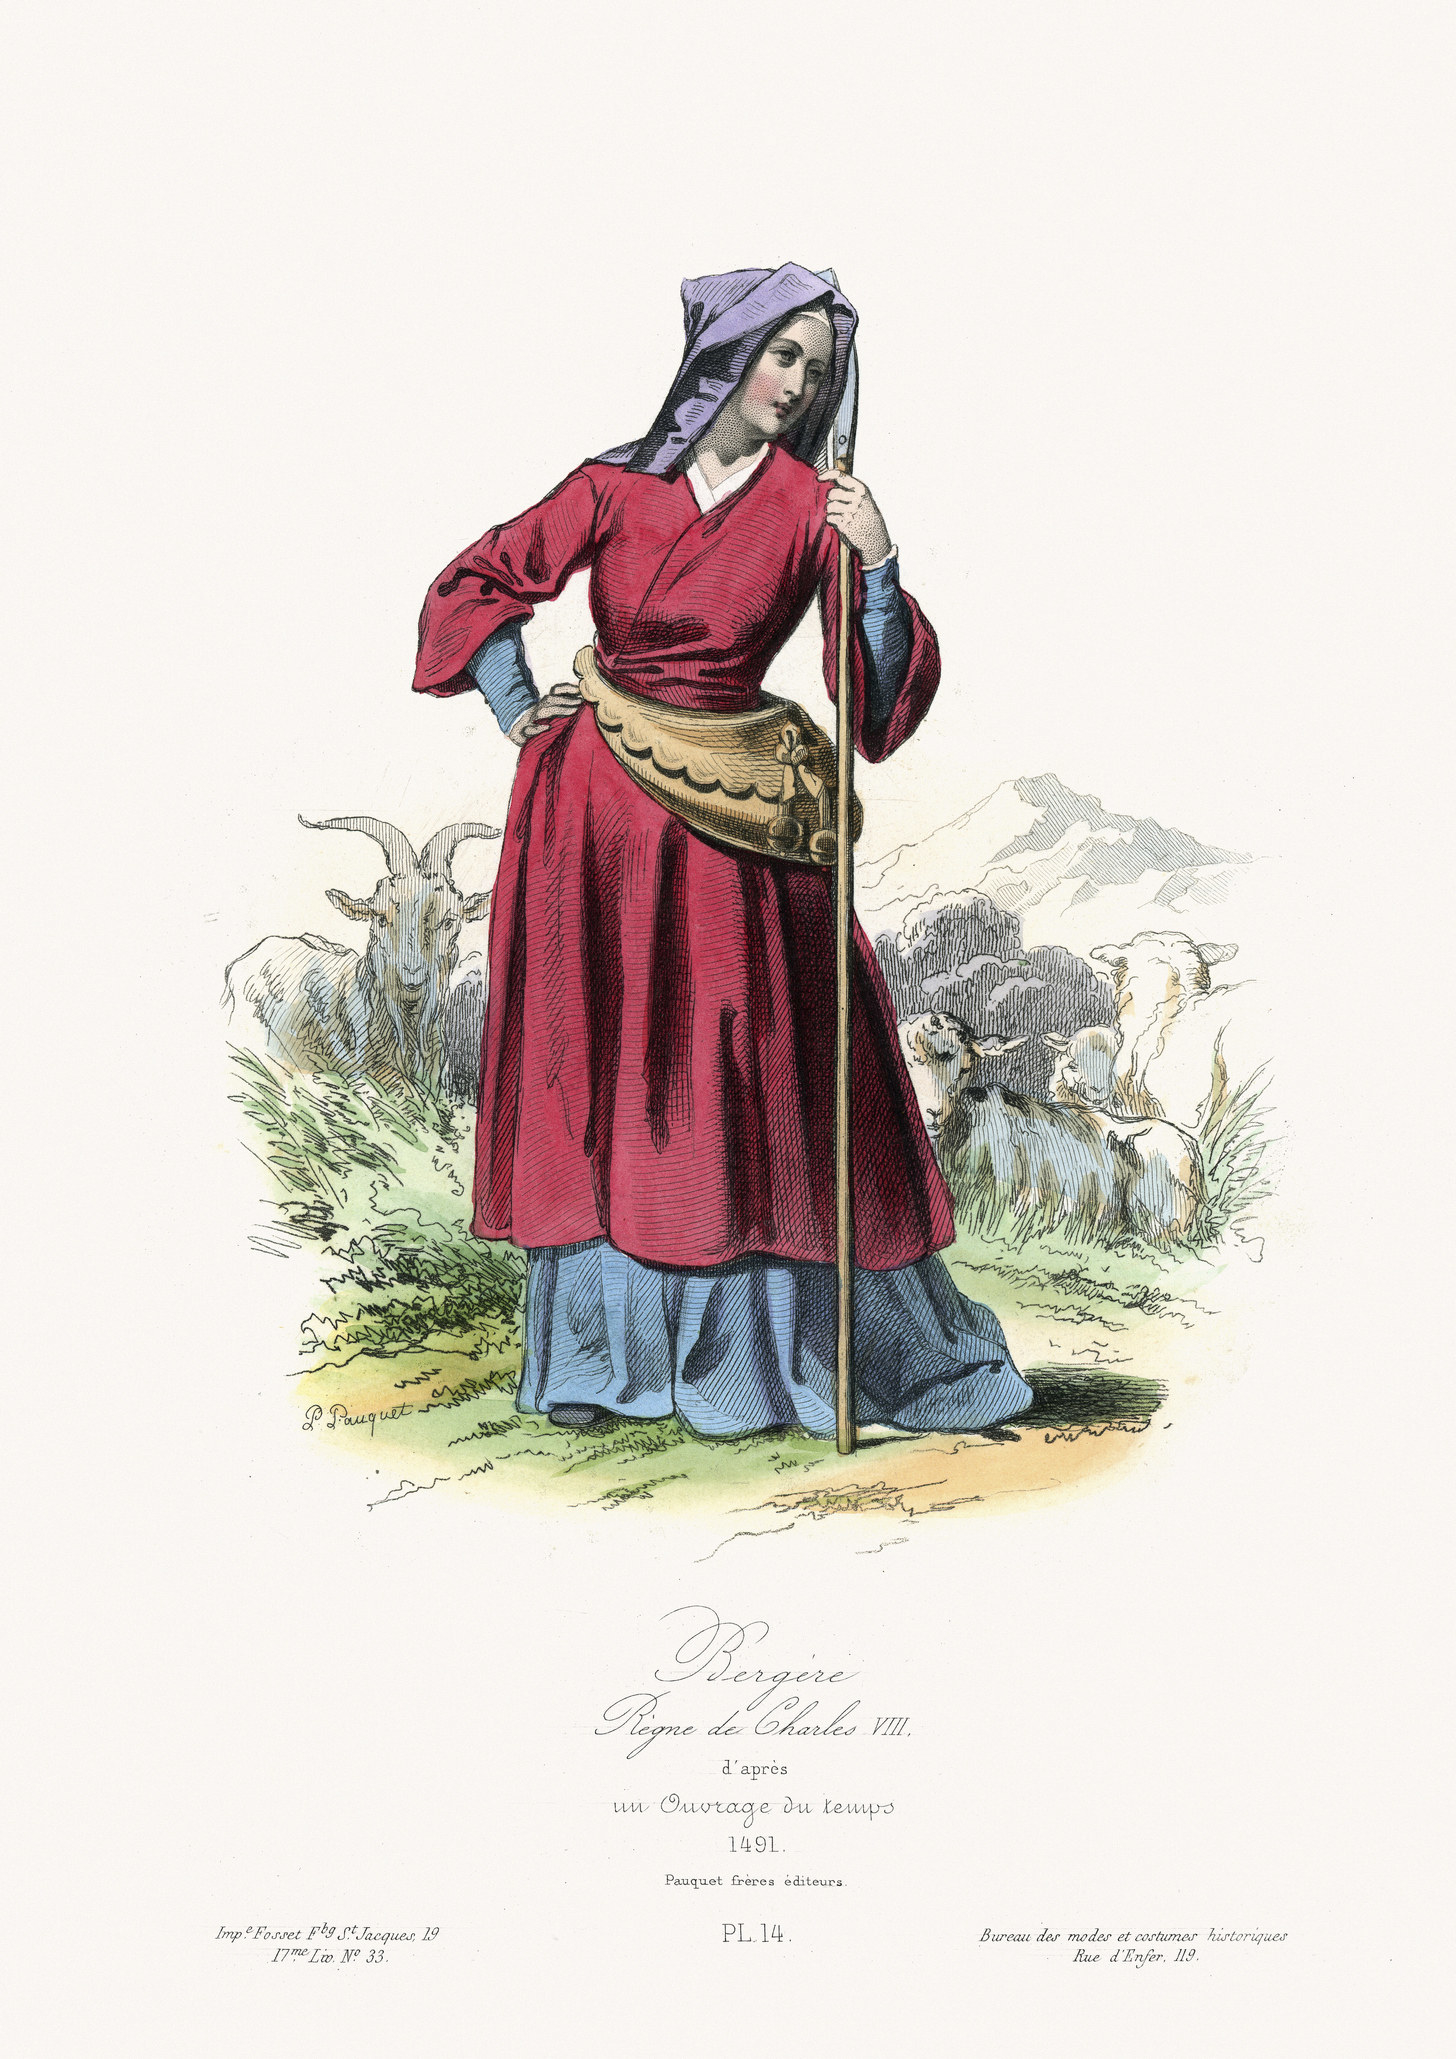 herder in colorful dress